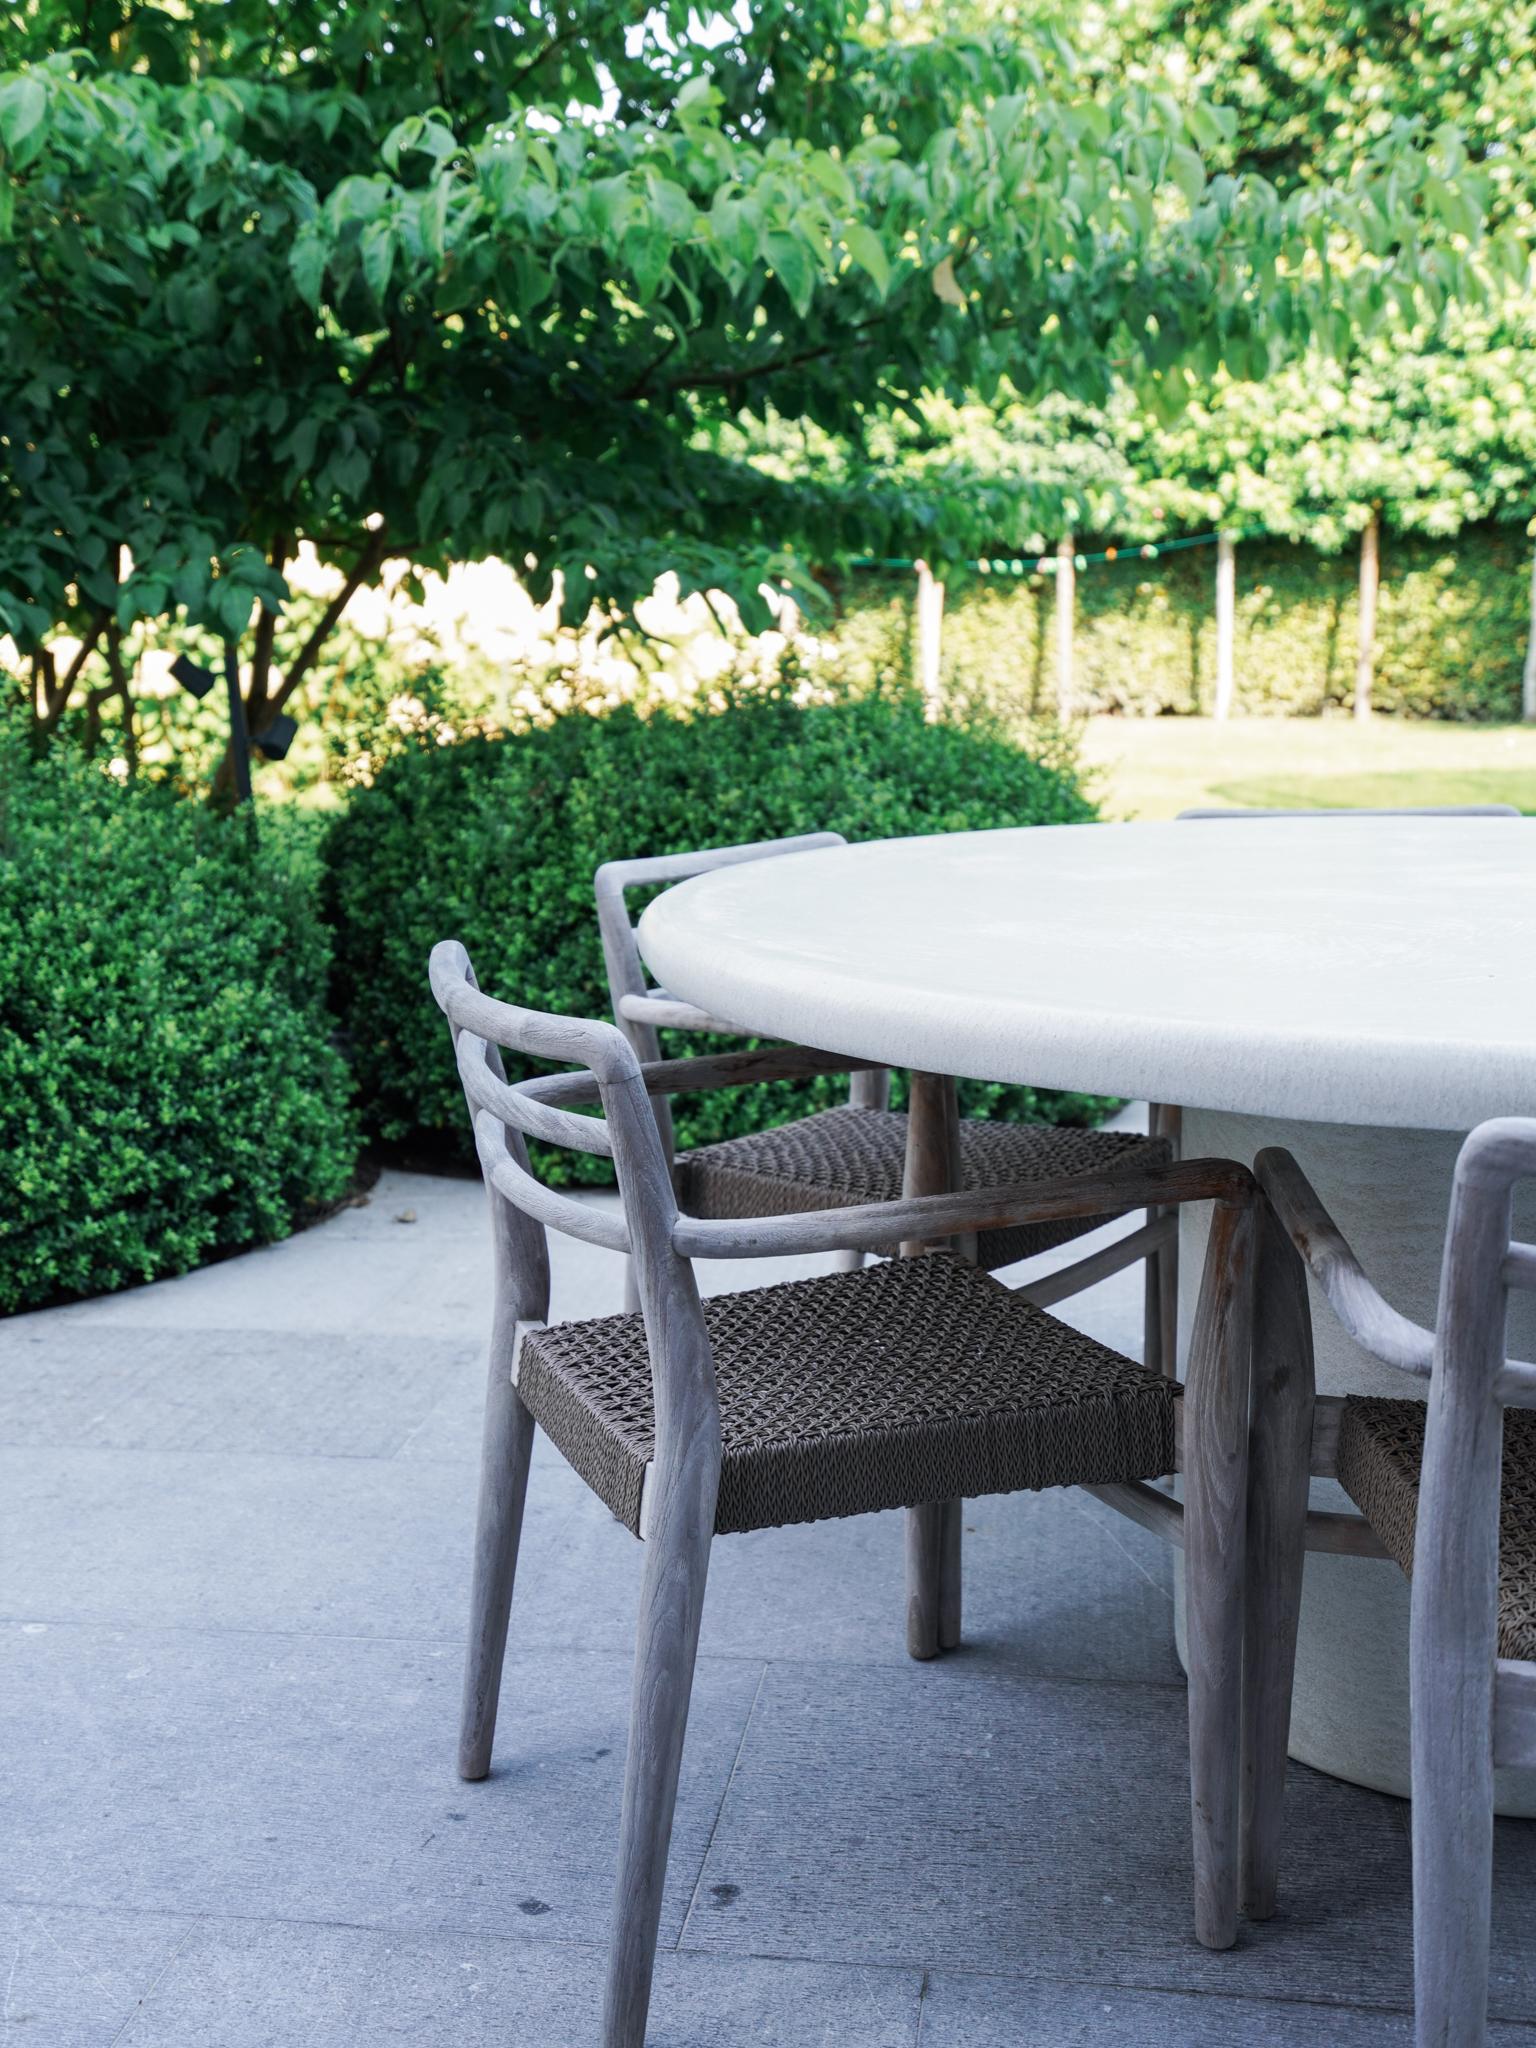 This table is made out of microcement, but especially for outdoors. The outdoor microcement is a special mixture of polymers, cement and silicate stones to make a very strong and durable surface with sublime looks. It's also a joy to sit on because